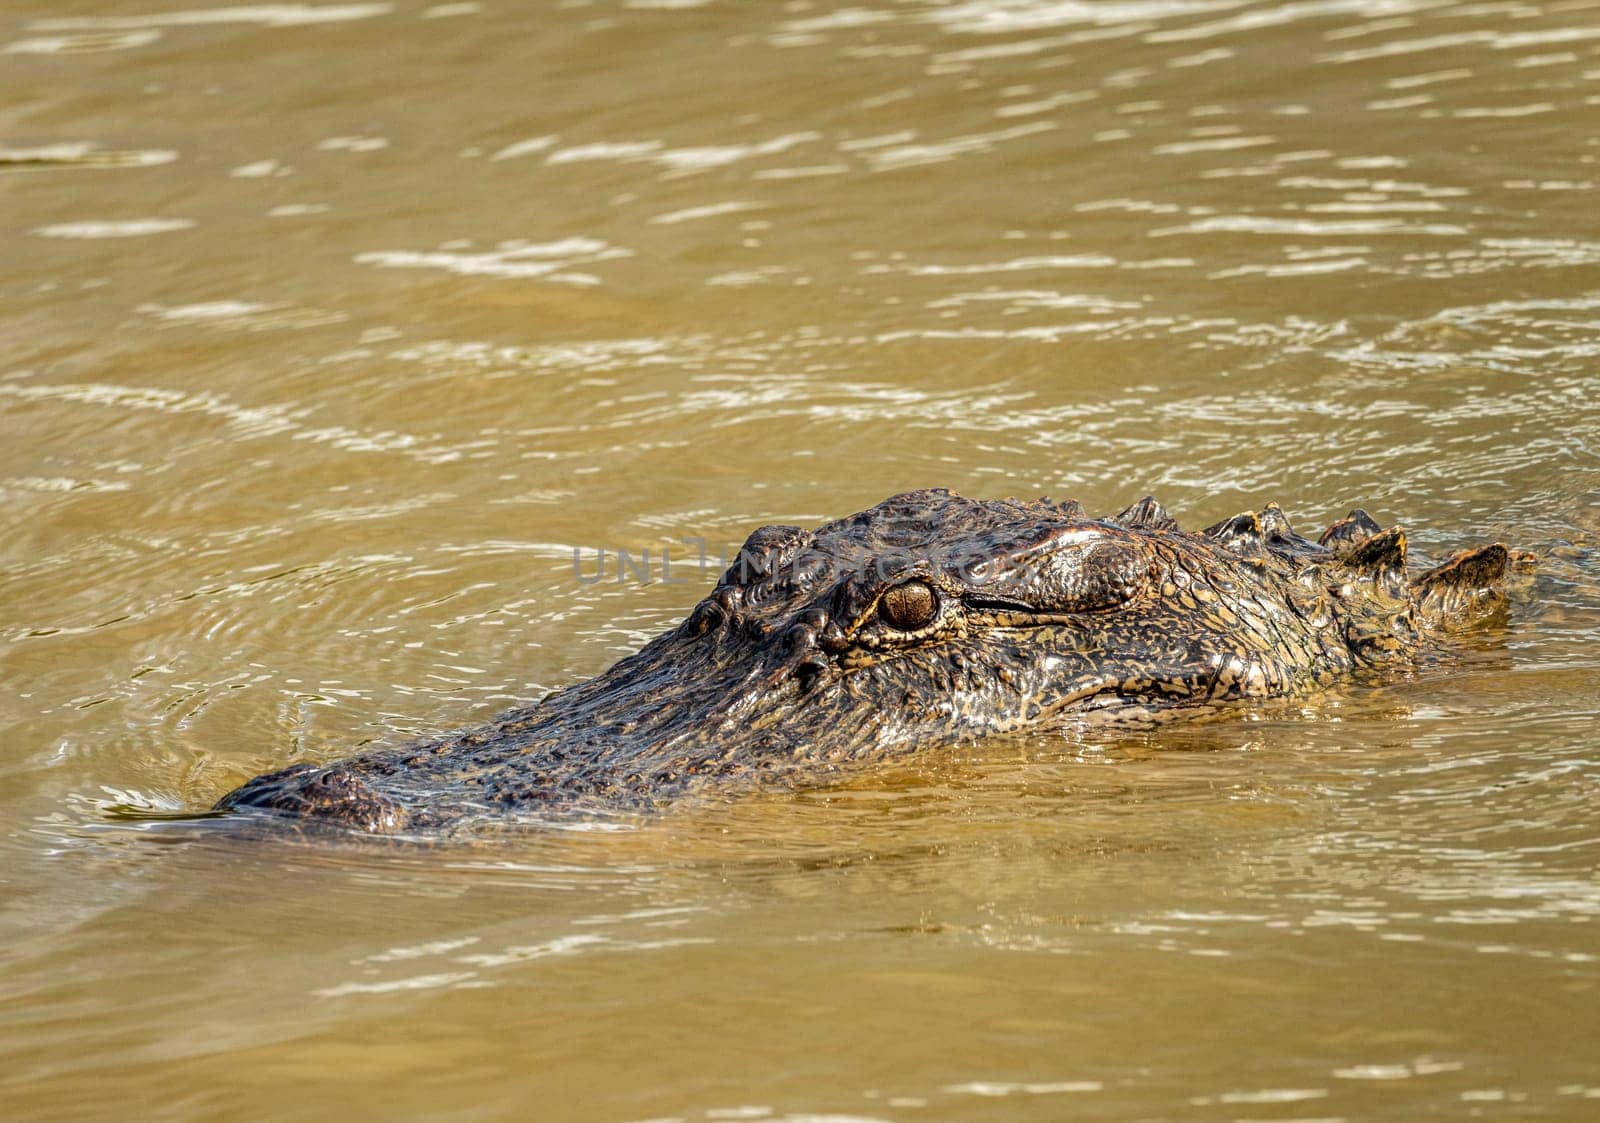 Head and eyes of an American alligator in calm waters of Atchafalaya delta